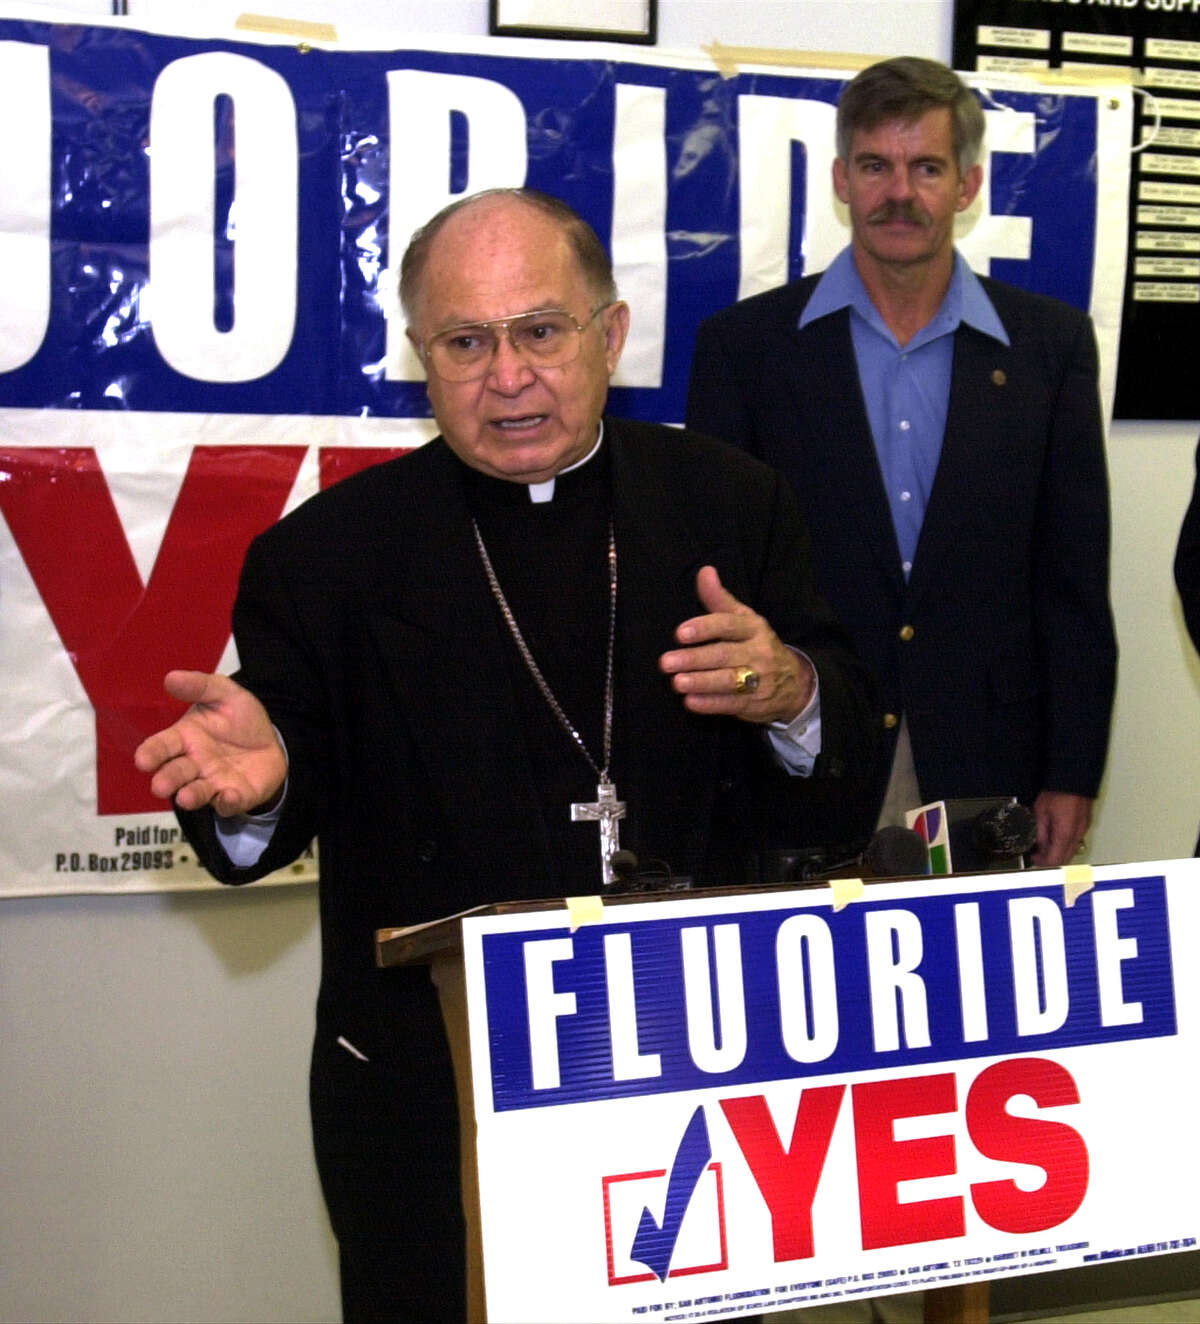 Archbishop Patrick Flores speaks about fluoride with Mayor Howard Peak at the Barrio Comprehensive Family Health Care Center. The bishop urged people to get out and vote.